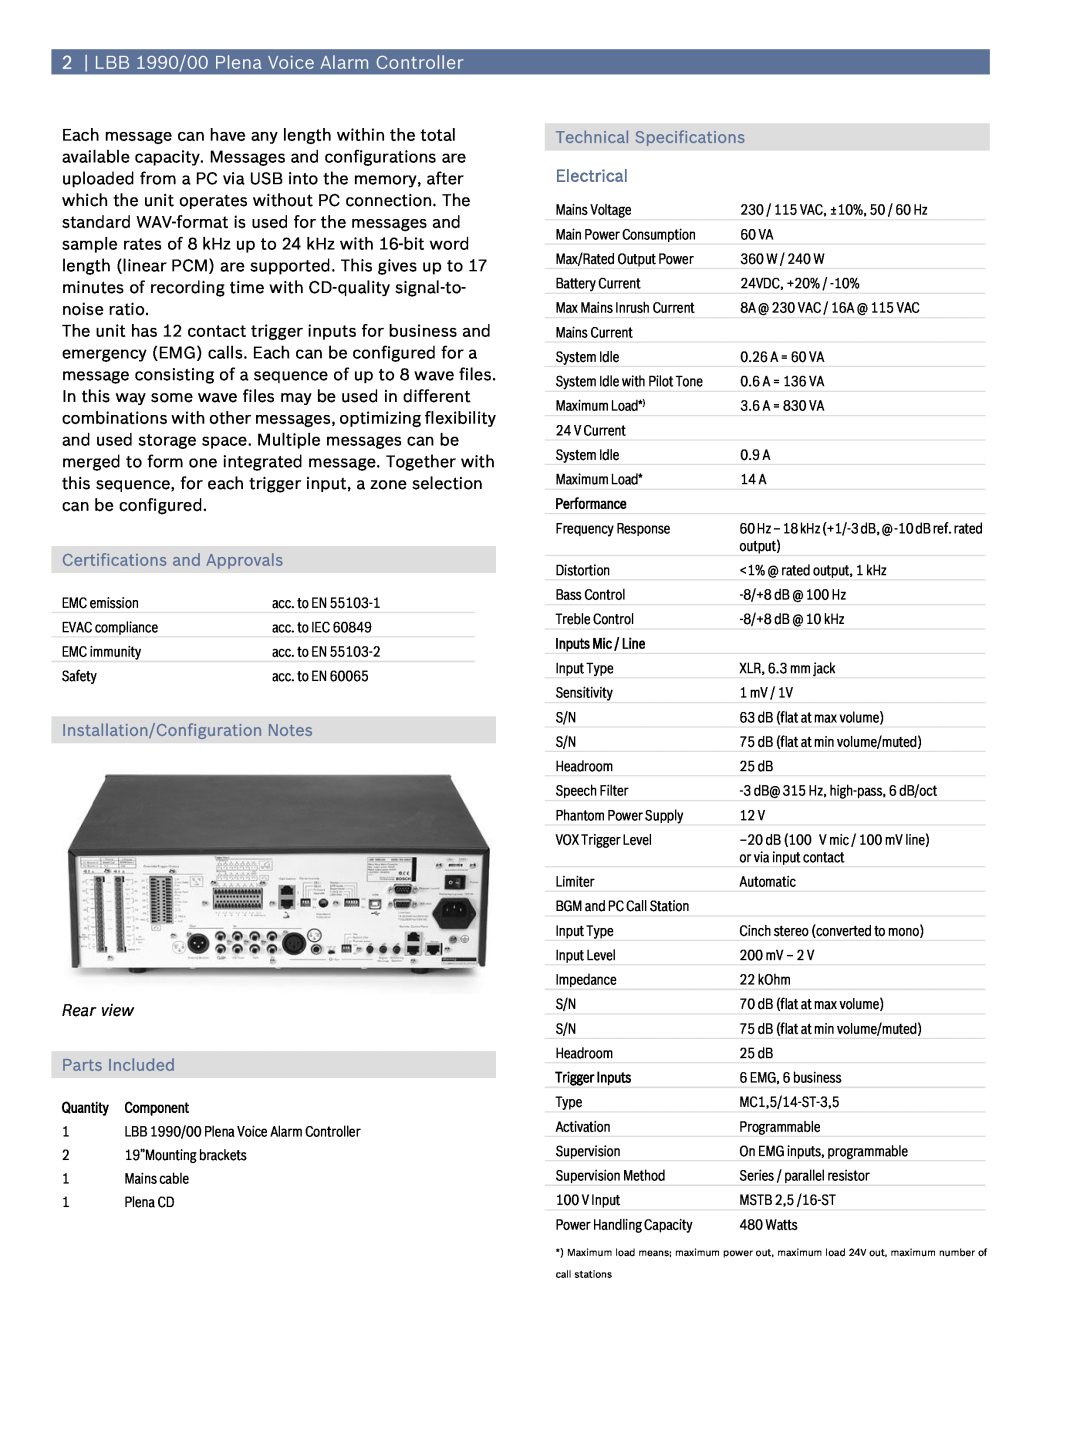 Bosch Appliances LBB 1990 0 manual LBB 1990/00 Plena Voice Alarm Controller, Certifications and Approvals, Parts Included 